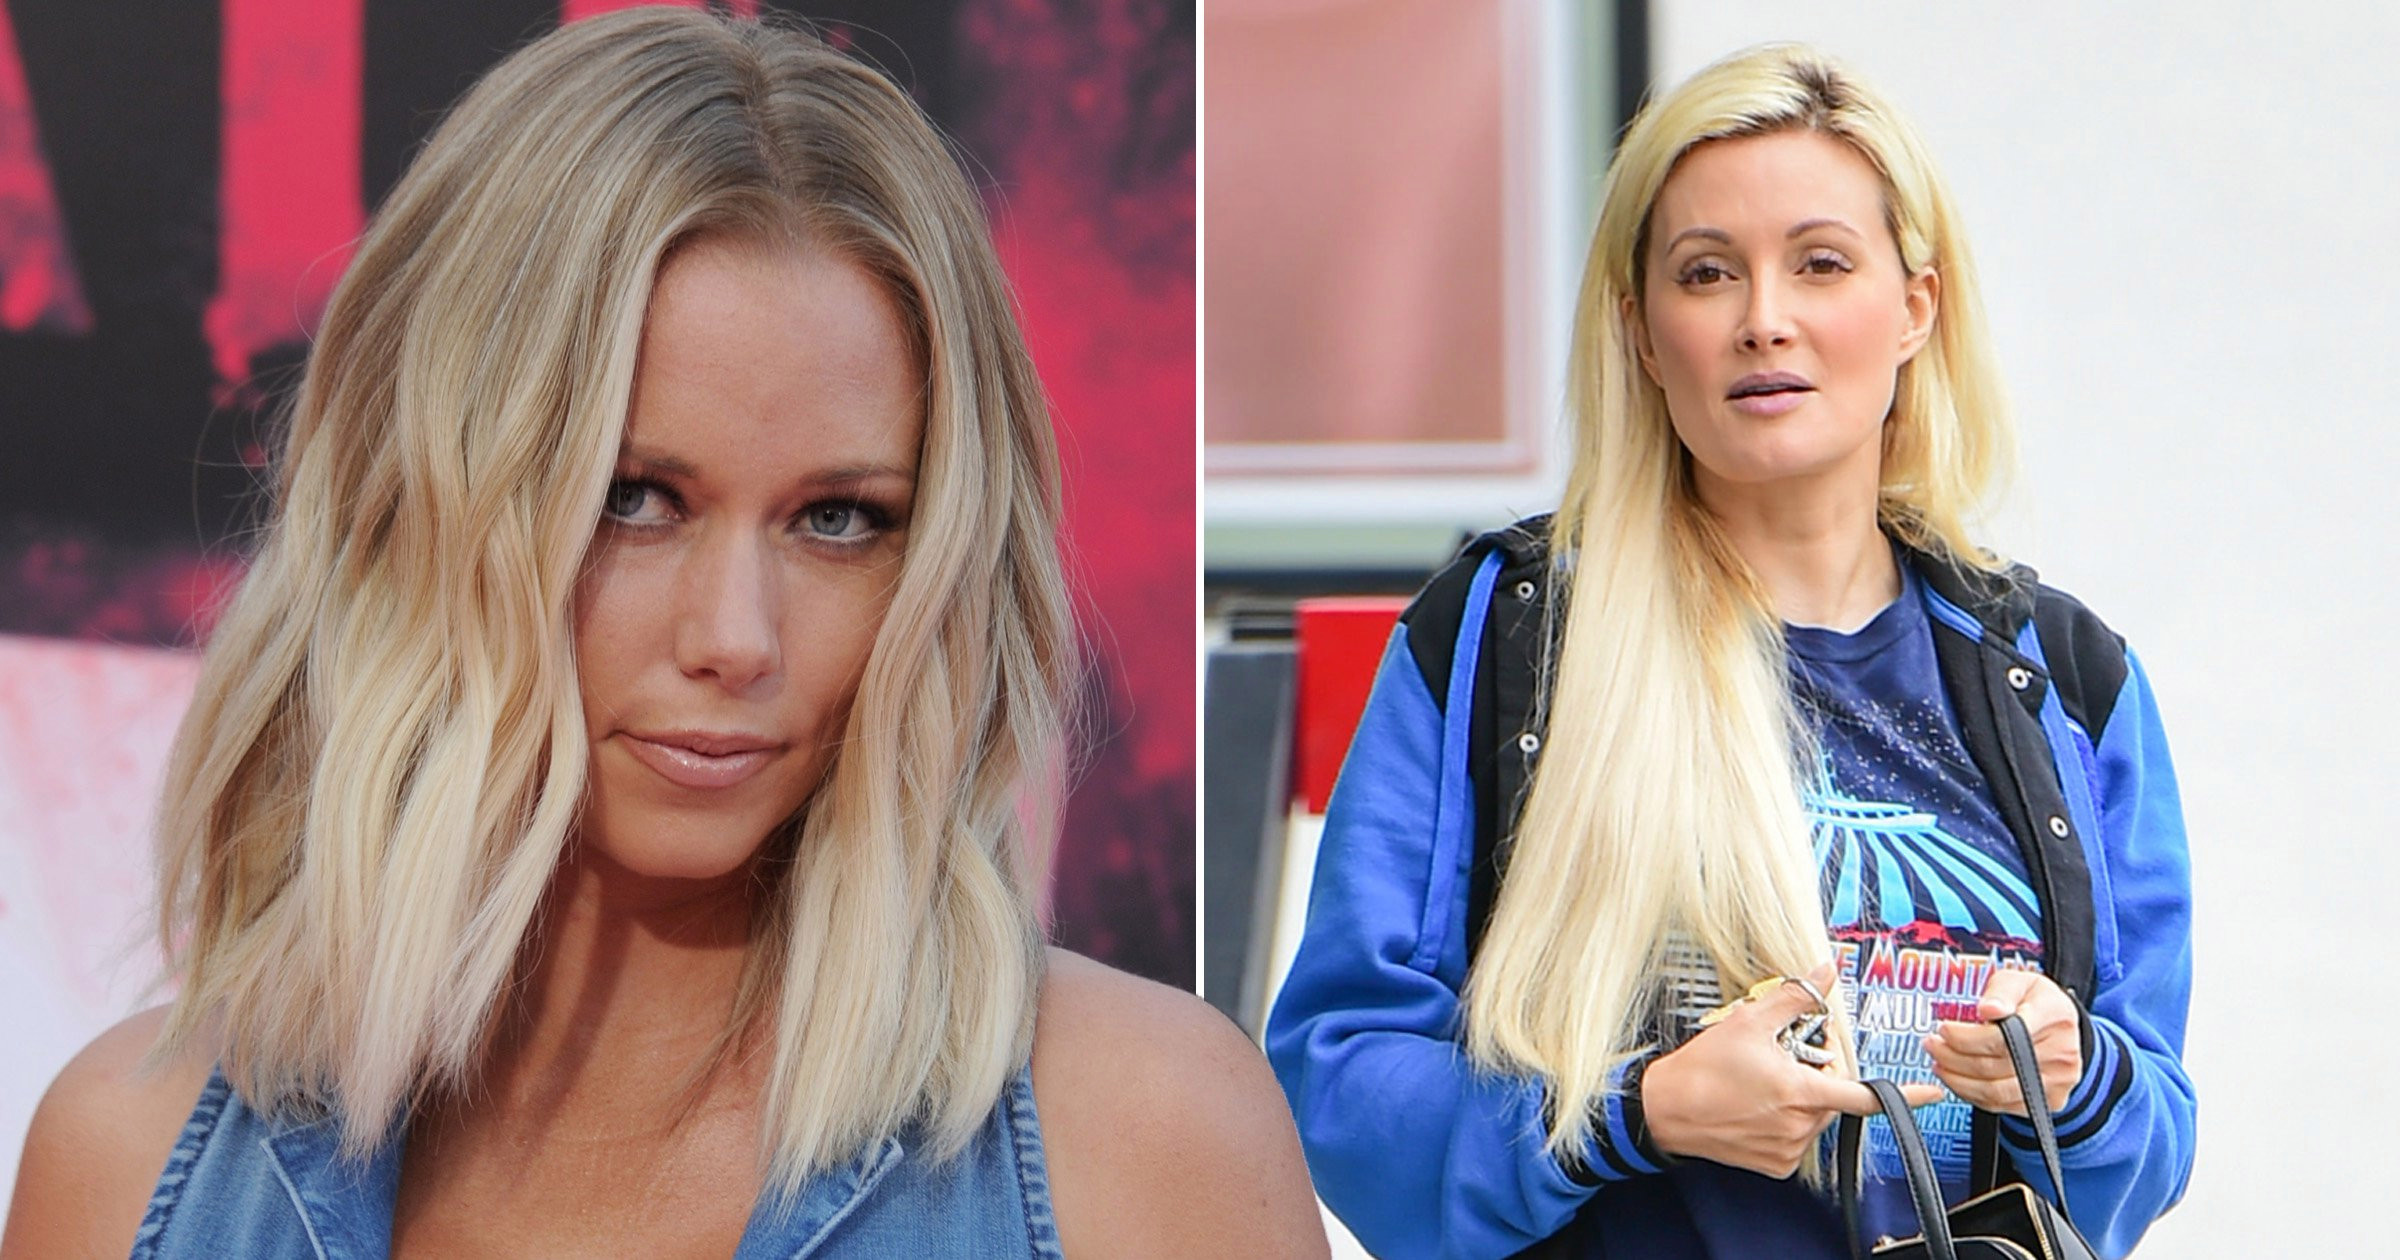 Kendra Wilkinson hits back after former Girls Next Door co-star Holly Madison reignites feud with Hugh Hefner sex claims